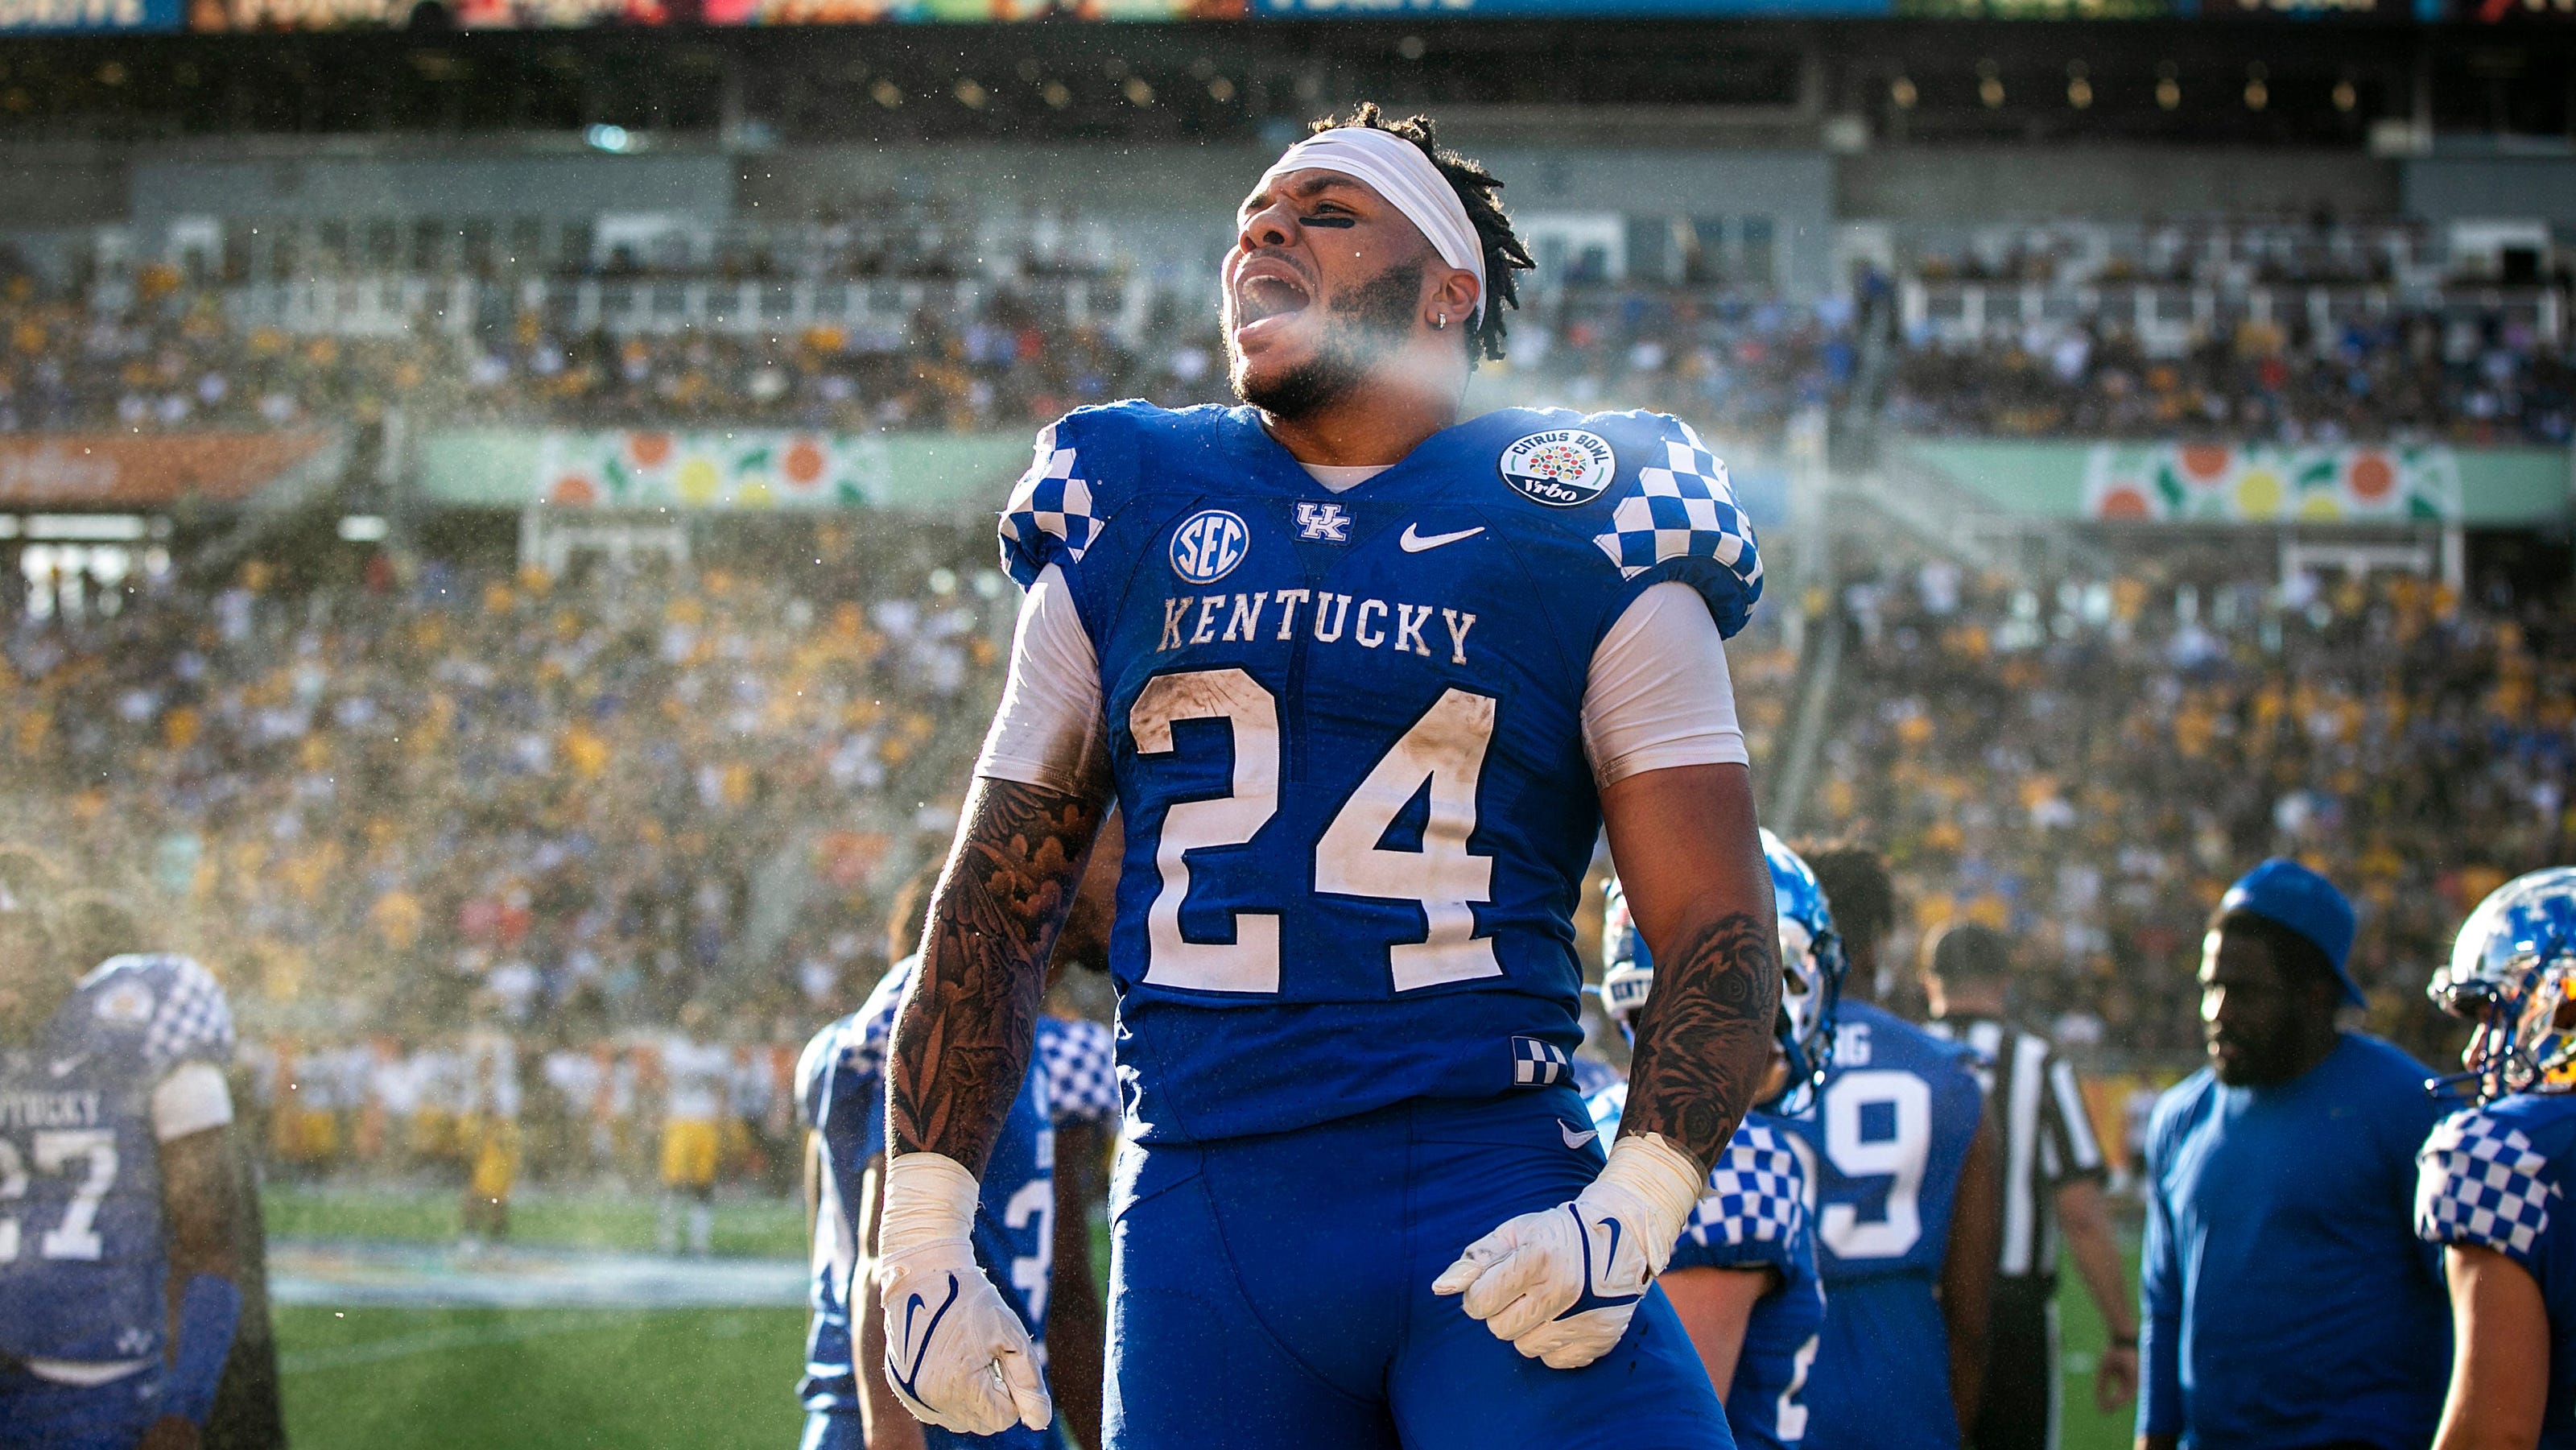 Chris Rodriguez will look to bounce back for Kentucky after a DUI arrest